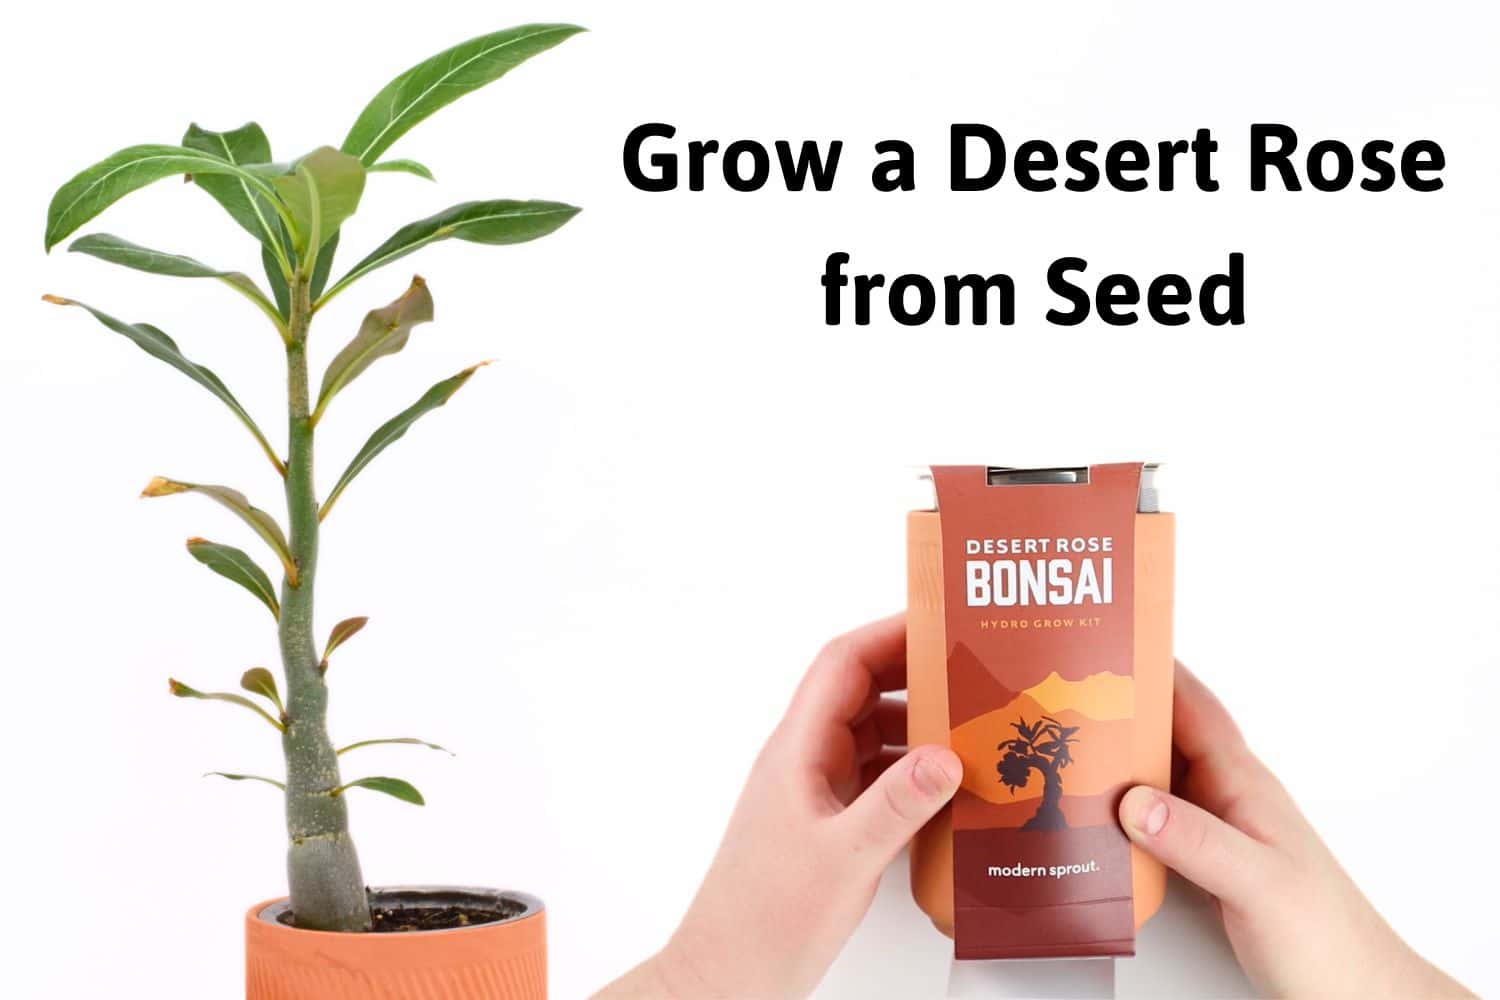 holding the modern sprout bonsai terra cotta kit with the grown desert rose plant with the title 'grow a desert rose from seed'